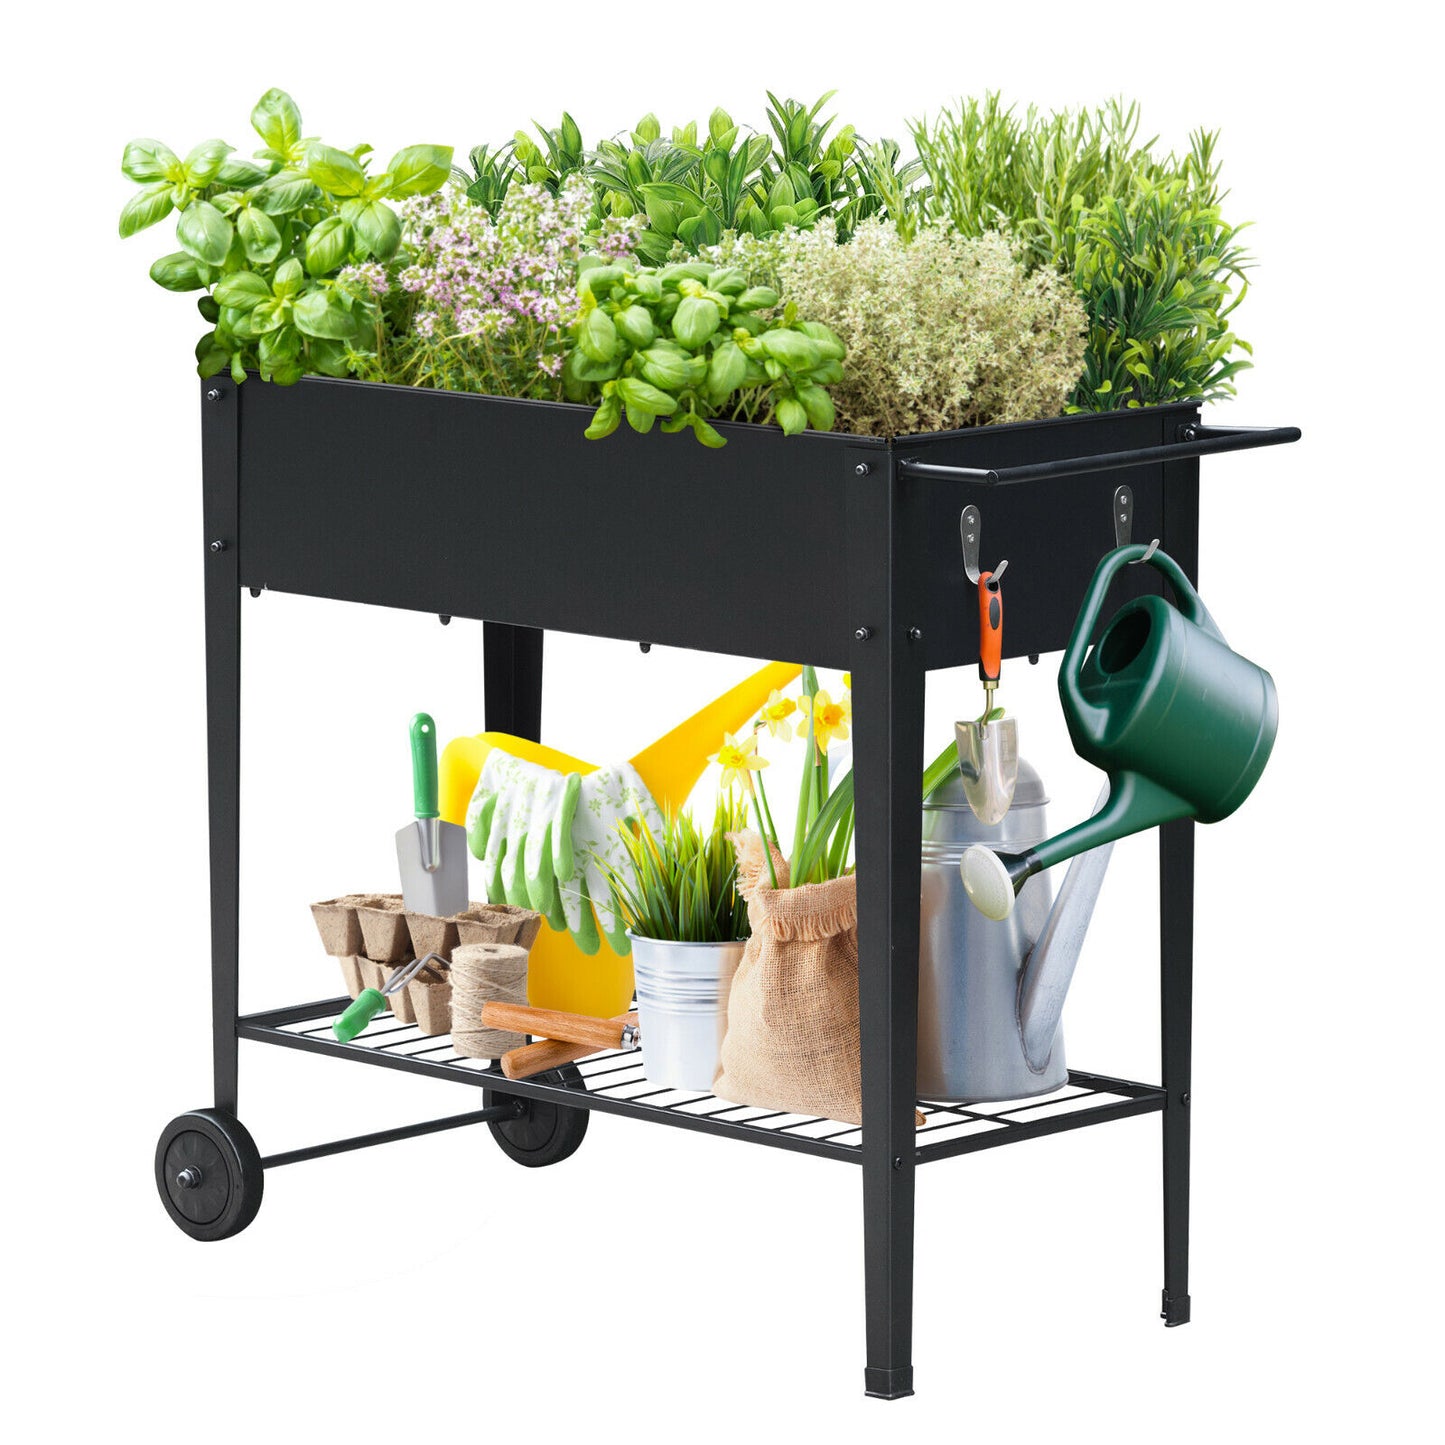 Outdoor Rolling Planter Storage Box Metal Frame with Extra Mesh Tires Black